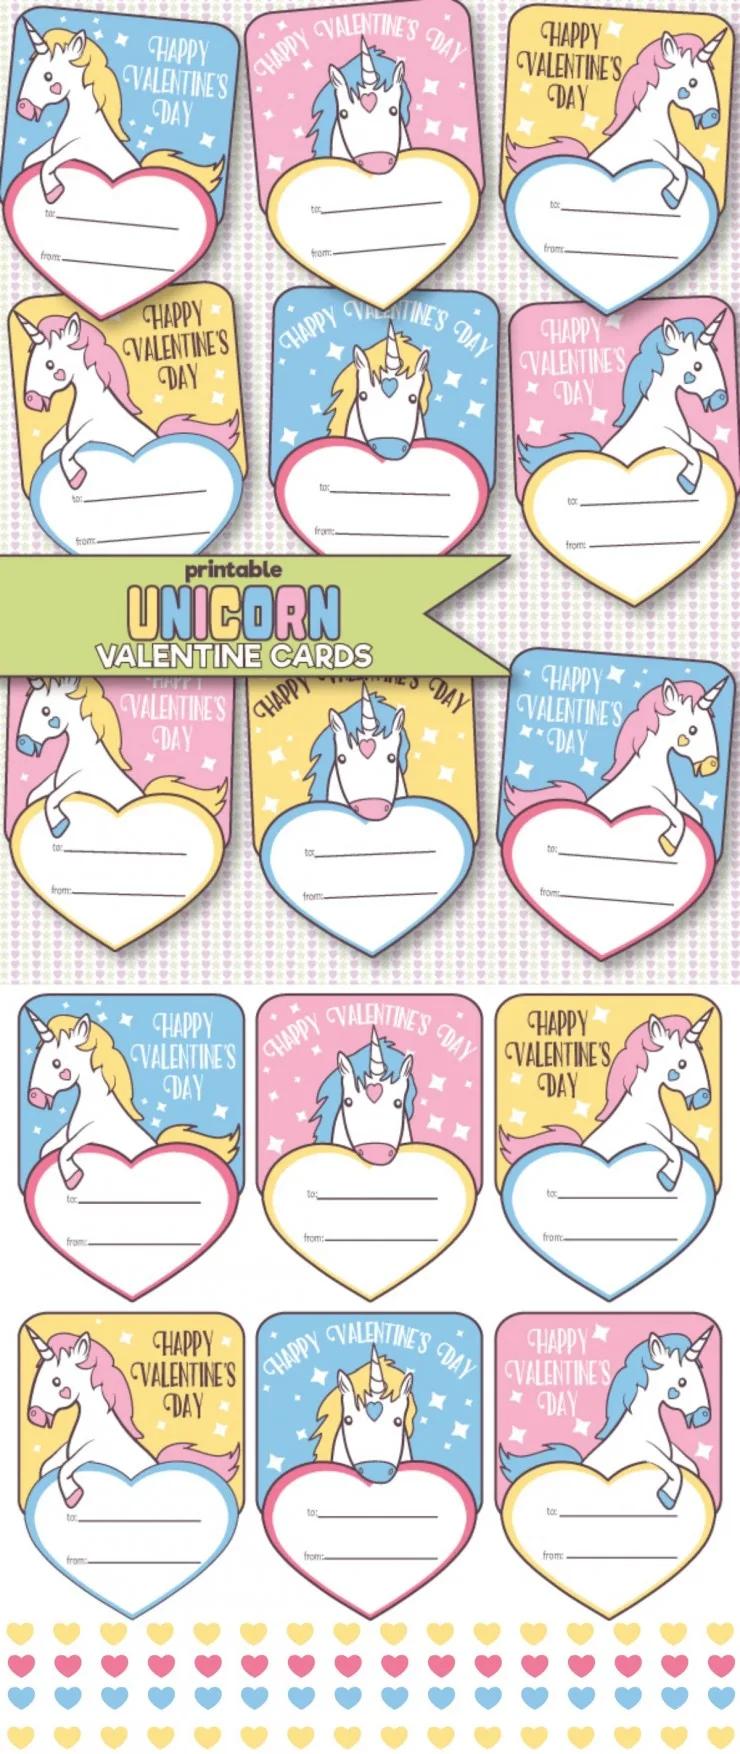 These Free Printable Unicorn Valentine's Day Cards are super cute don't you think? They bring me back to my childhood and my obsession with unicorns. They are just perfect for classroom valentines!